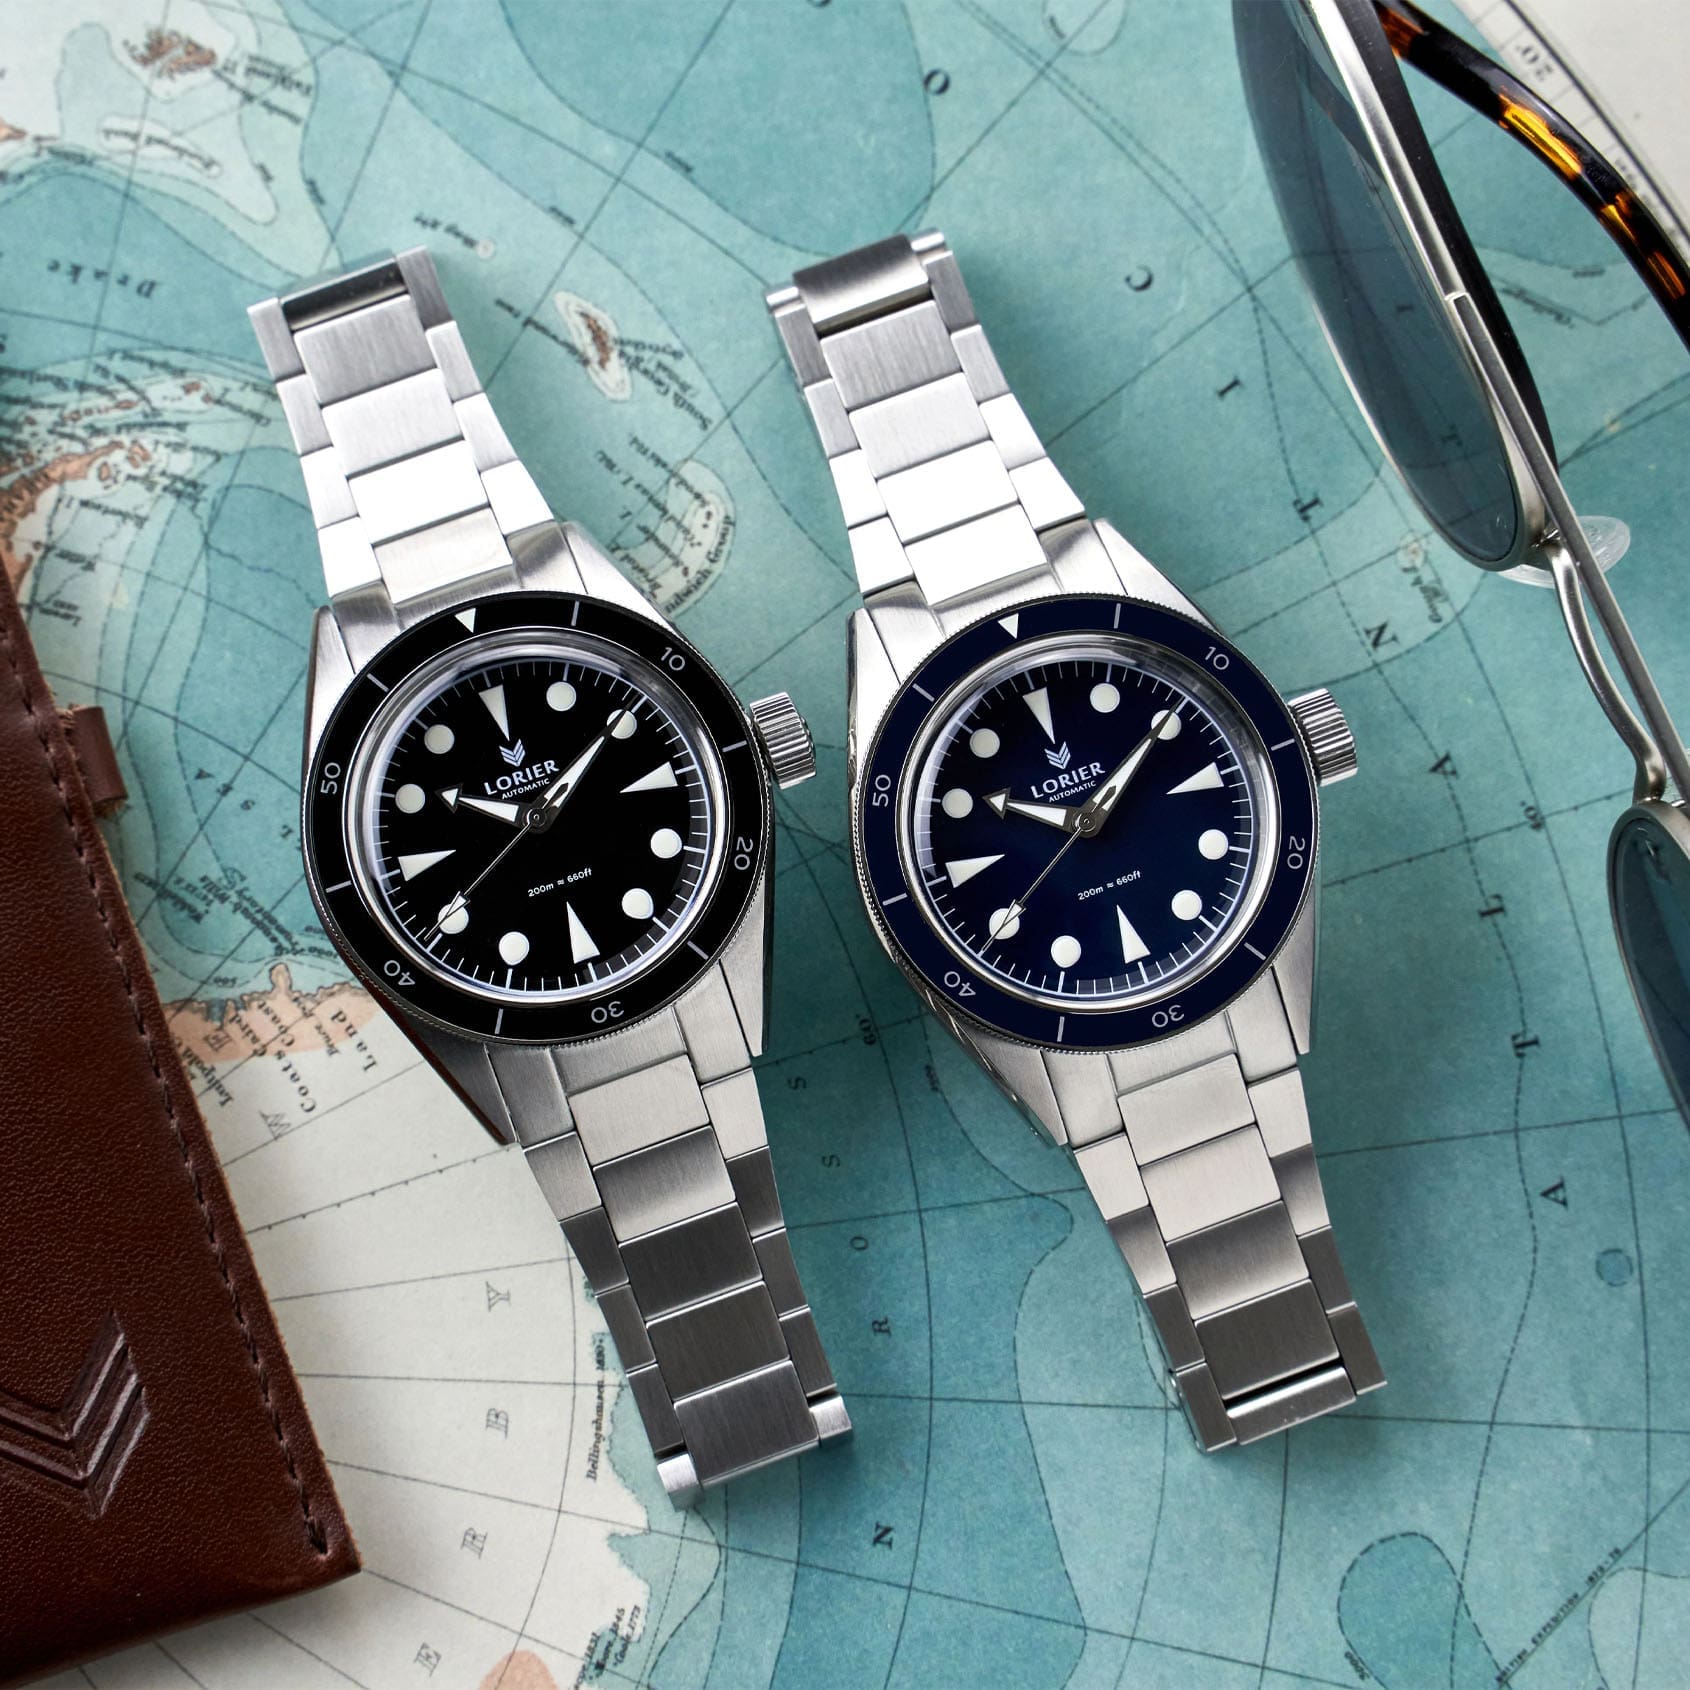 Oyster vs Jubilee: Which bracelet does the Rolex GMT Master II look better on?